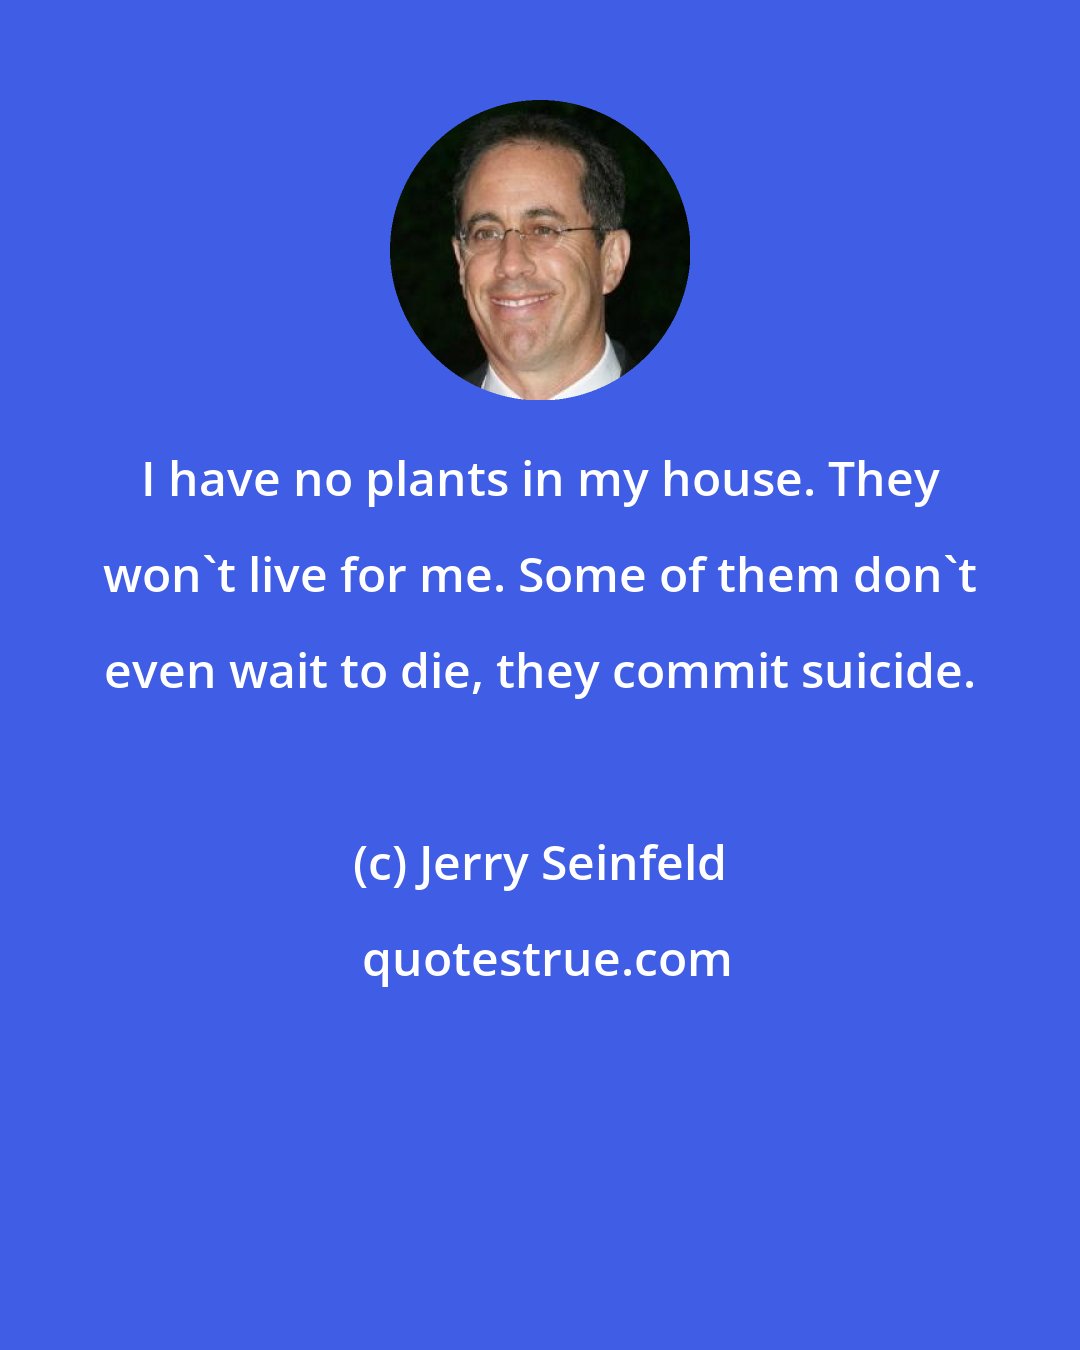 Jerry Seinfeld: I have no plants in my house. They won't live for me. Some of them don't even wait to die, they commit suicide.